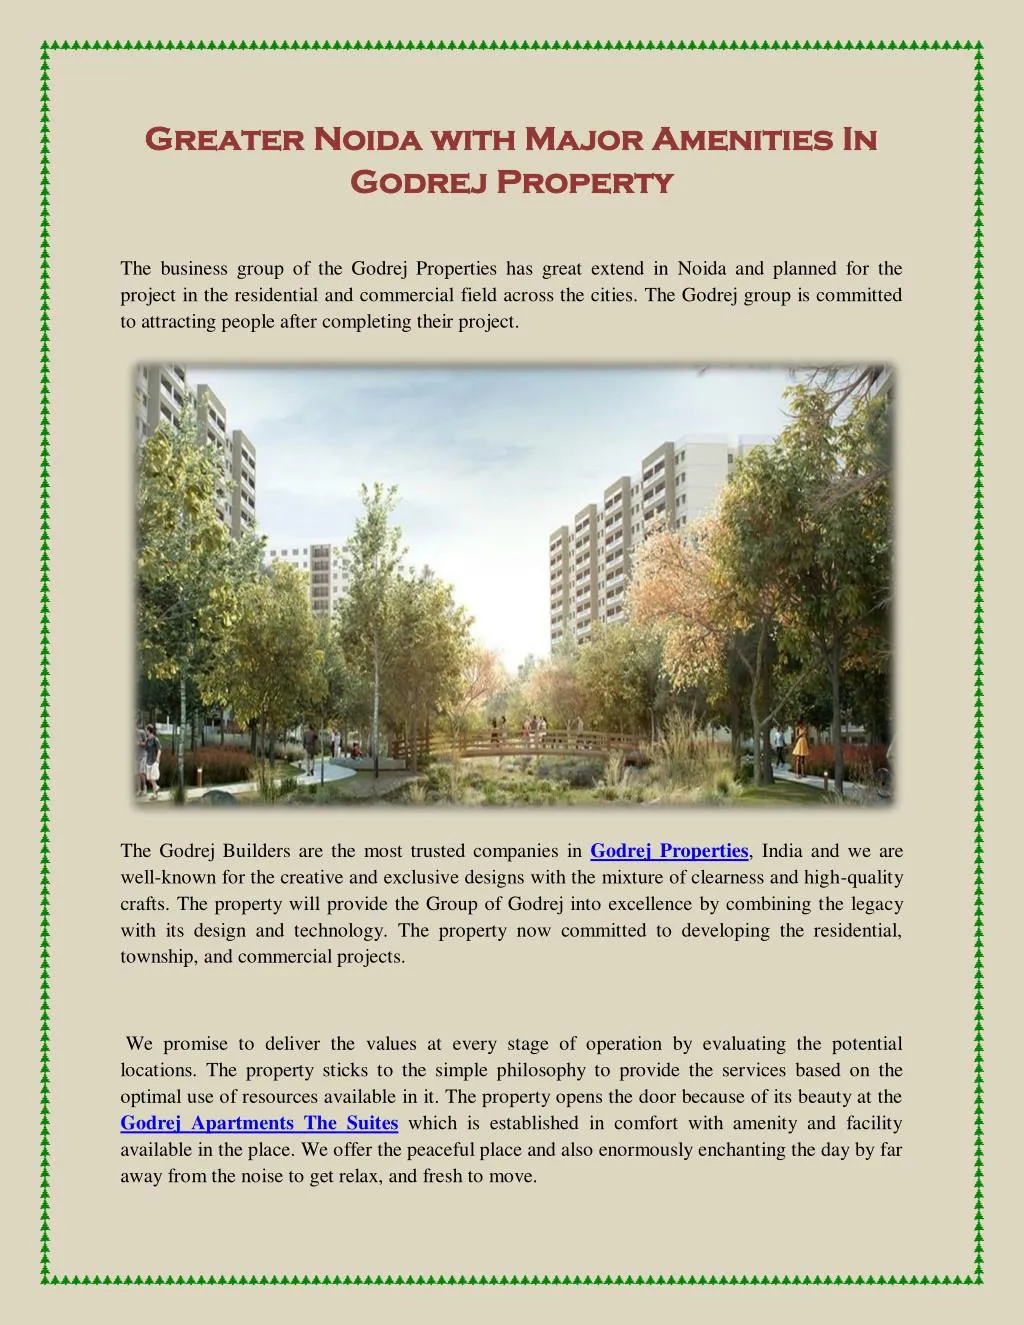 greater noida with major amenities in greater